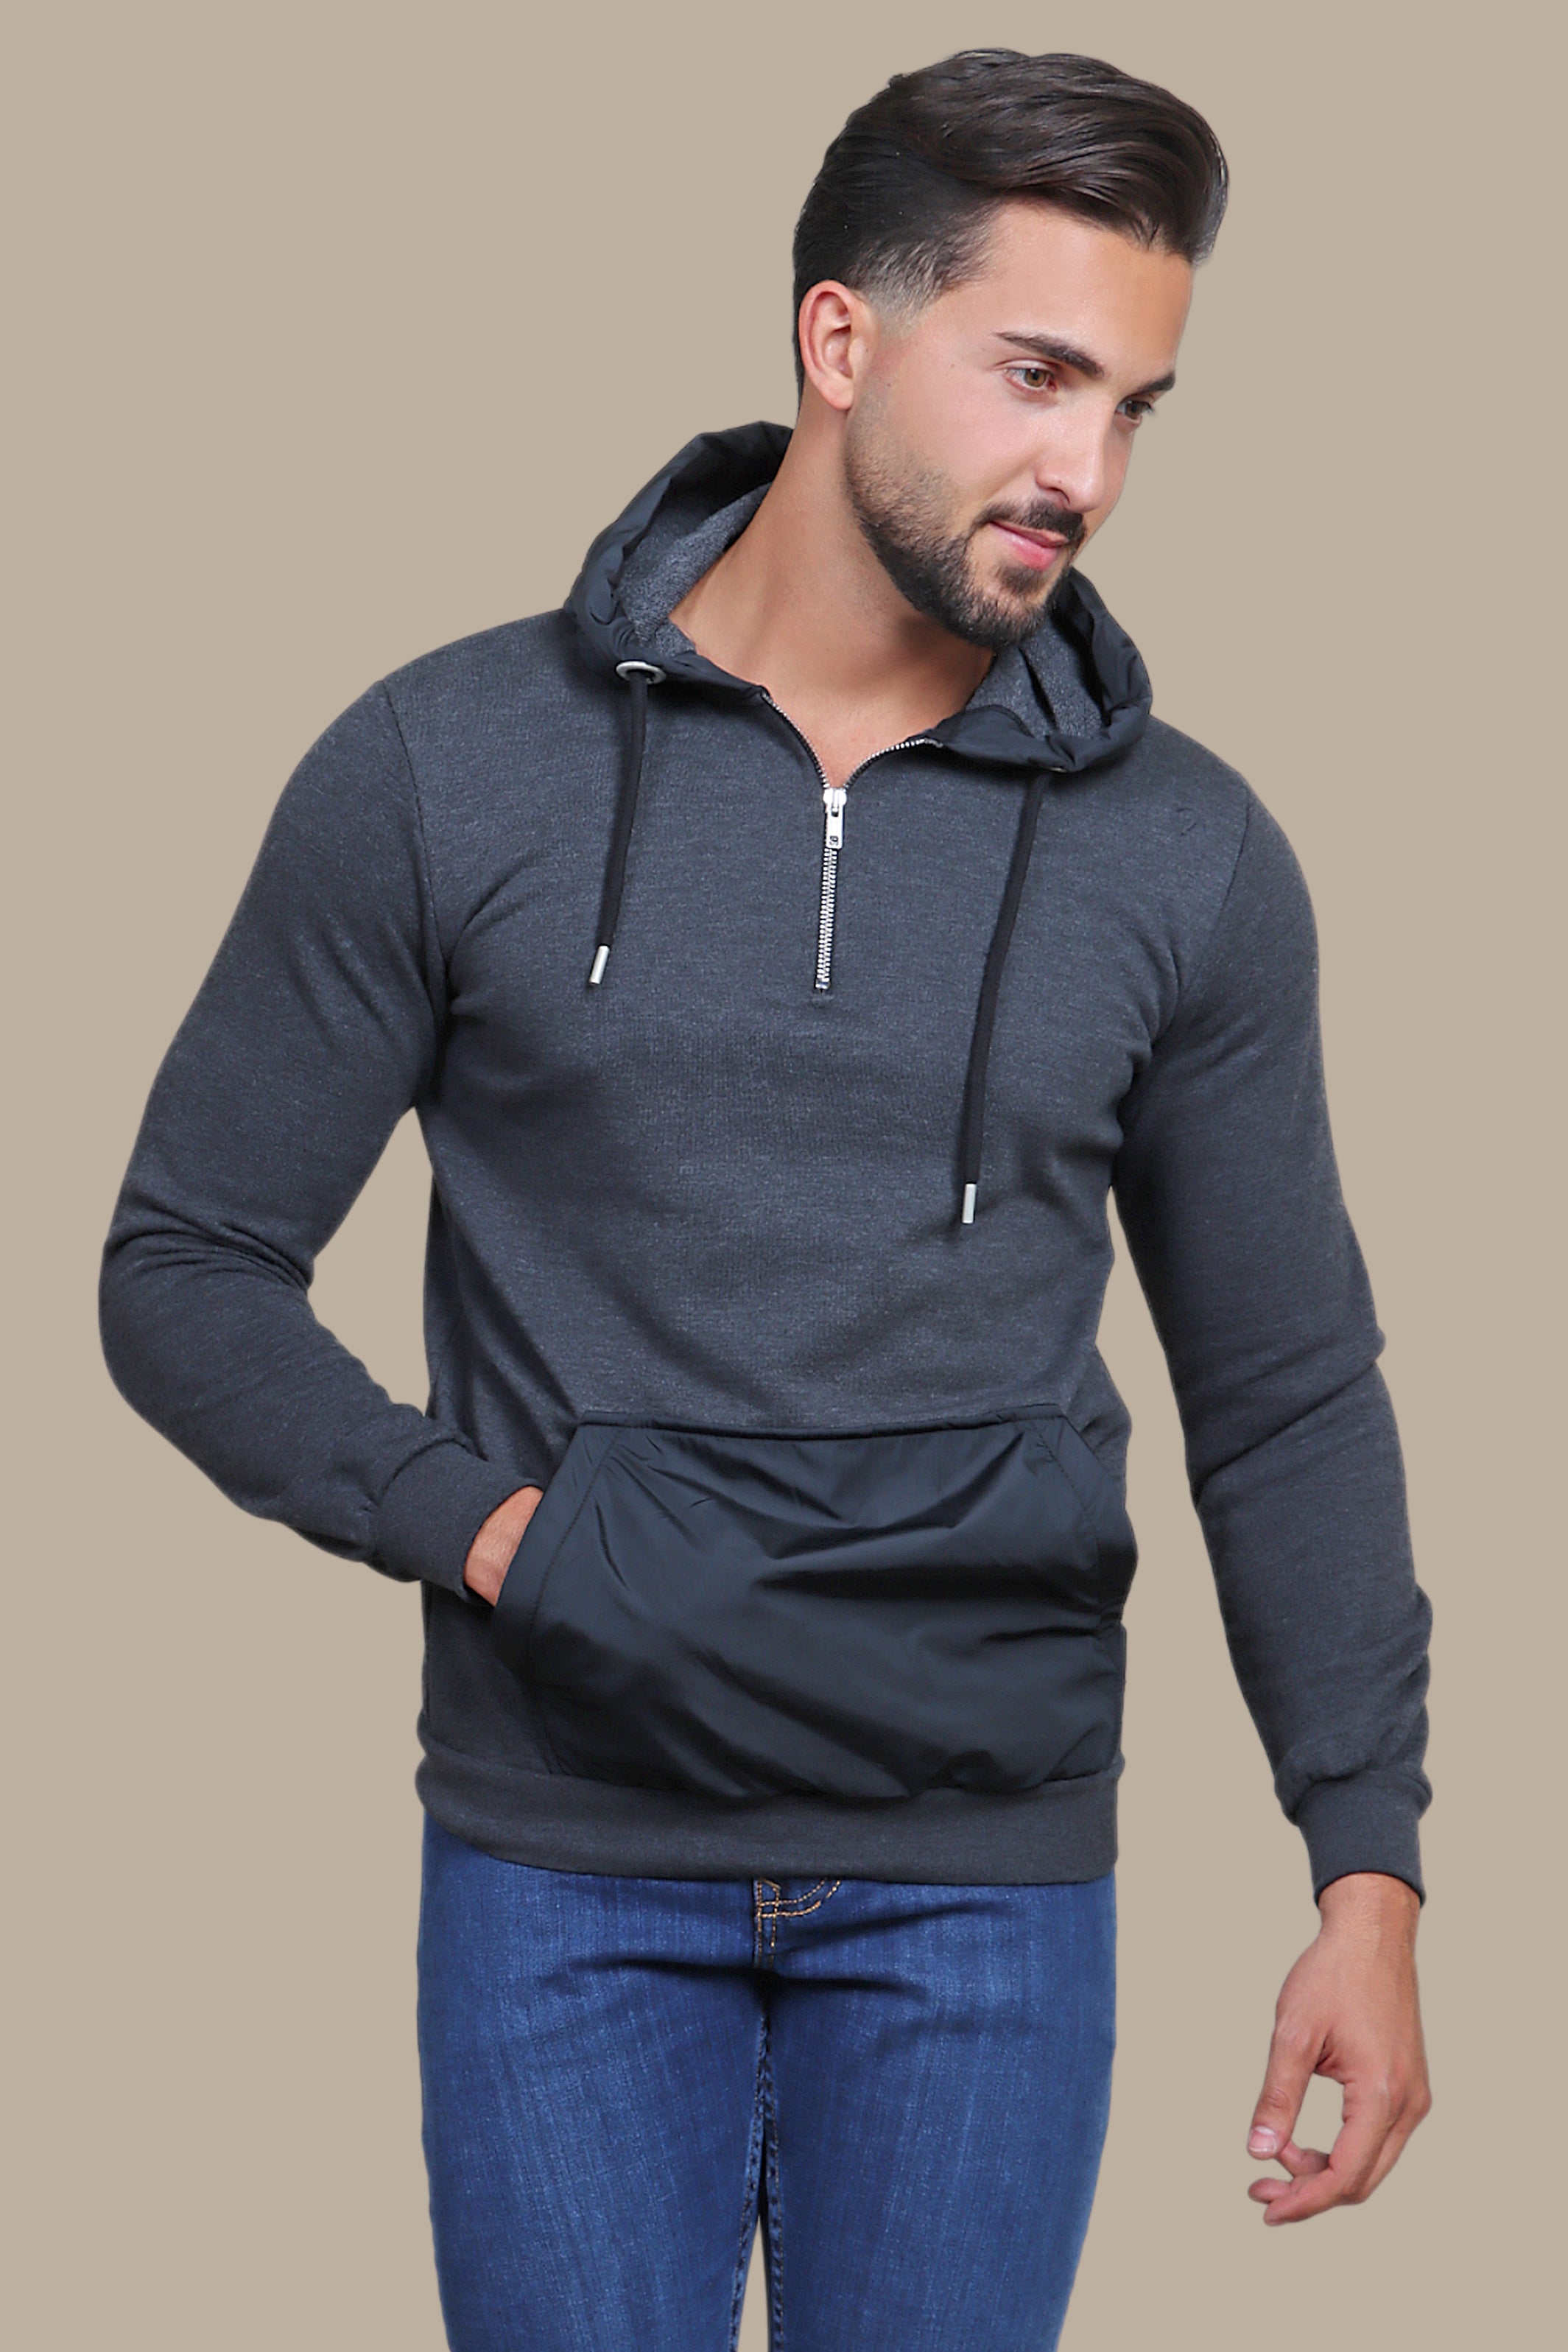 Sensual Shadows: The Dark Gray Hooded Sensation in Luxe Mix Fabric